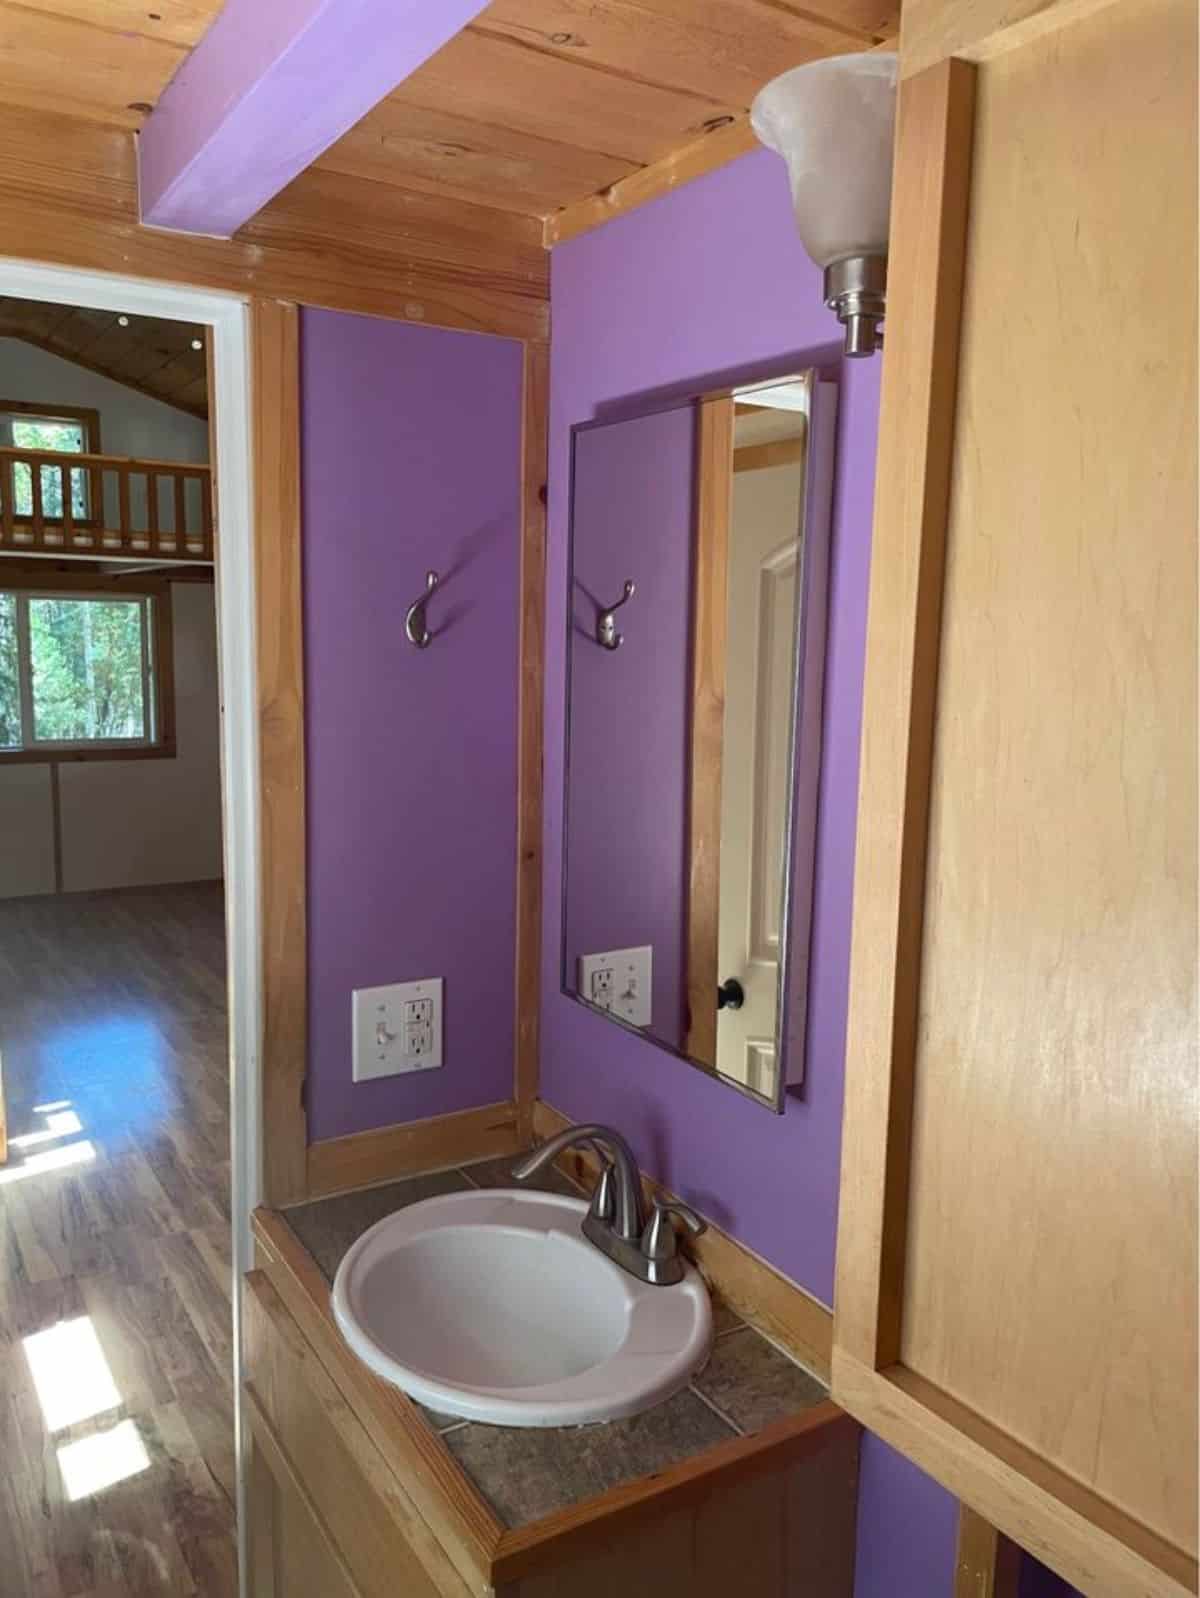 Sink with vanity and mirror and standard toilet in bathroom of 27’ Tiny House With Two Lofts